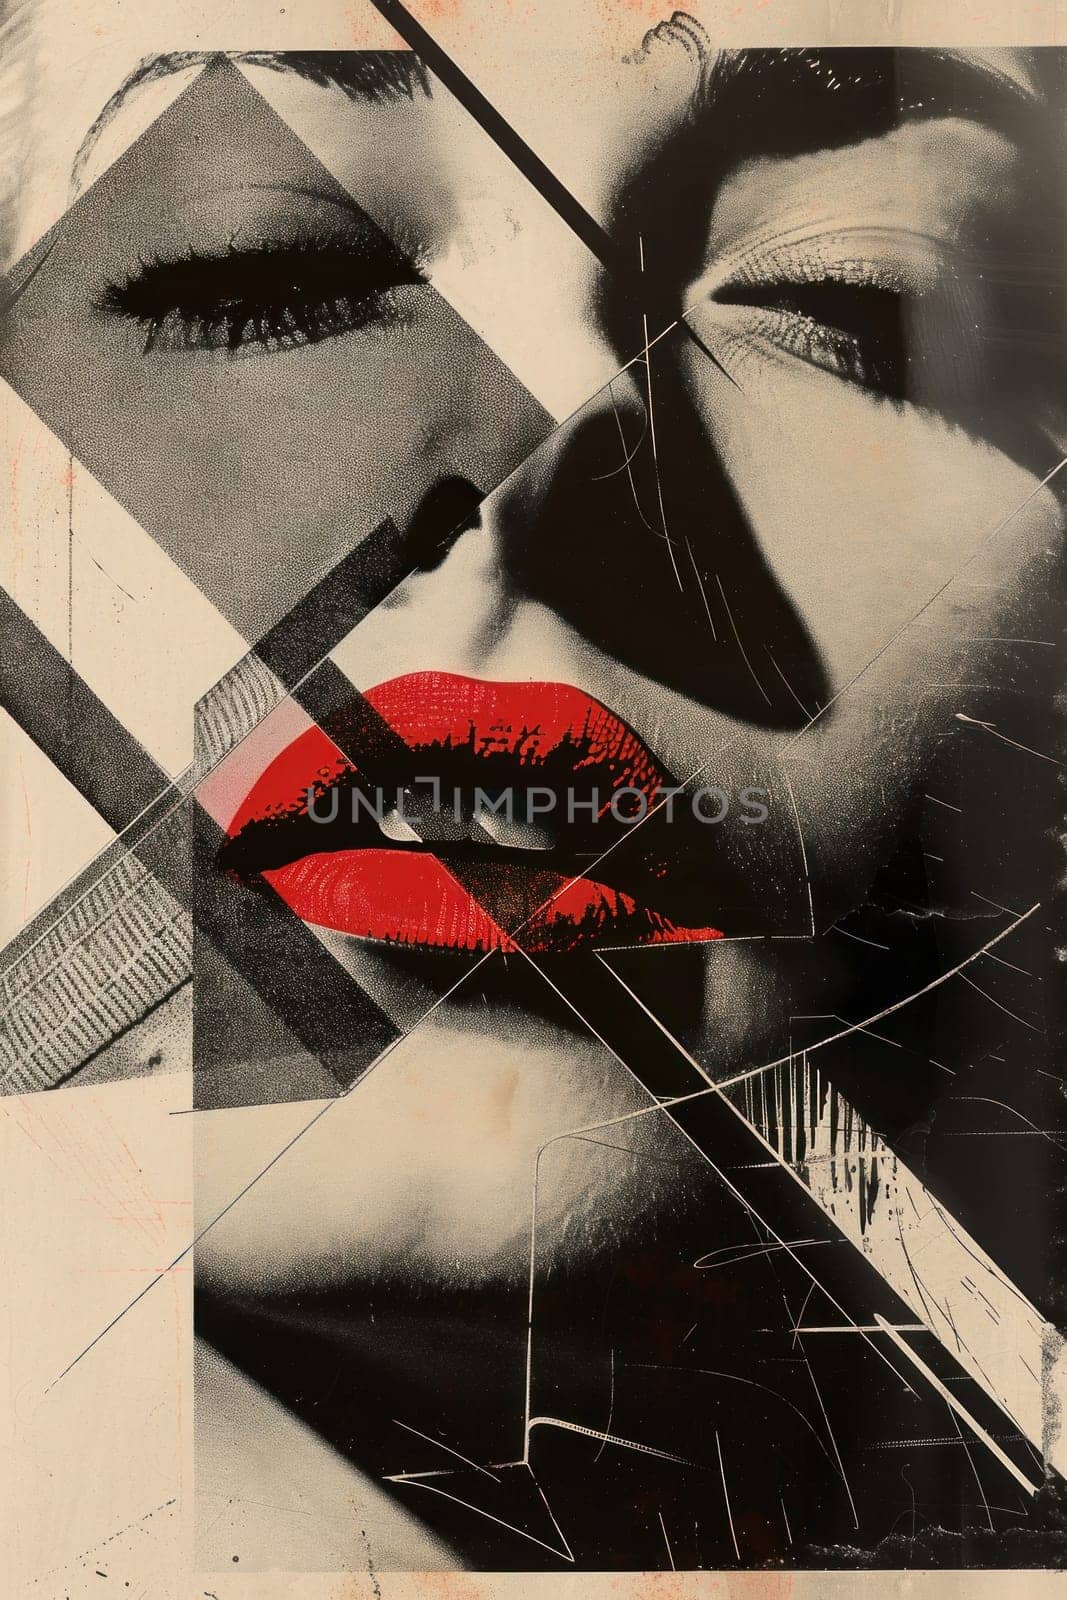 Beauty on geometric elegance bold red lips stand out against abstract background shapes